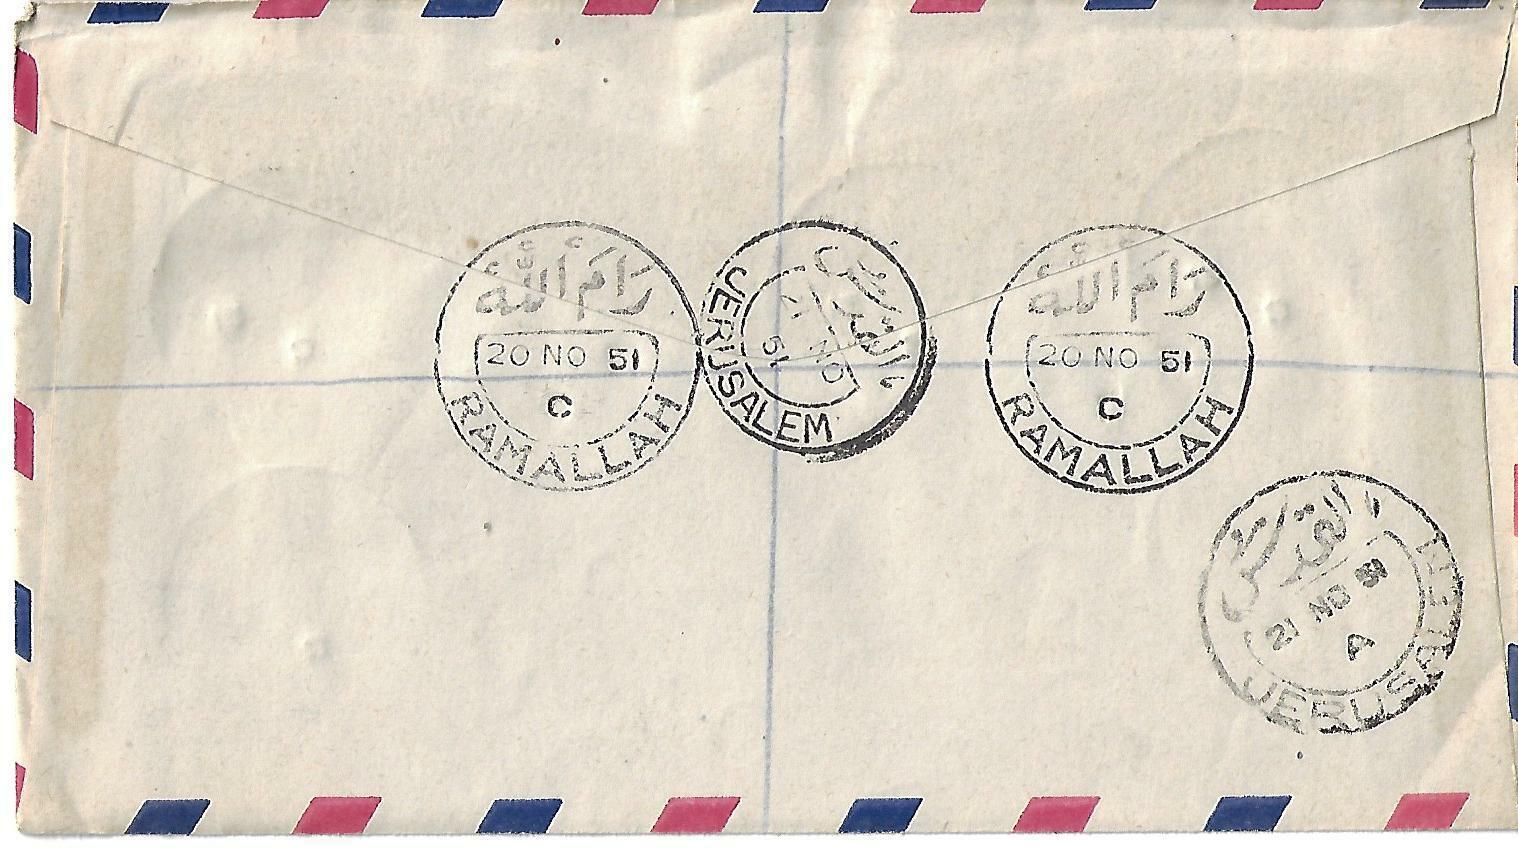 JORDAN PALESTINE 1951 REGISTERED RAMALLAH COVER WITH THE LARGE HALF MOON CANCELS Nieuw HOT